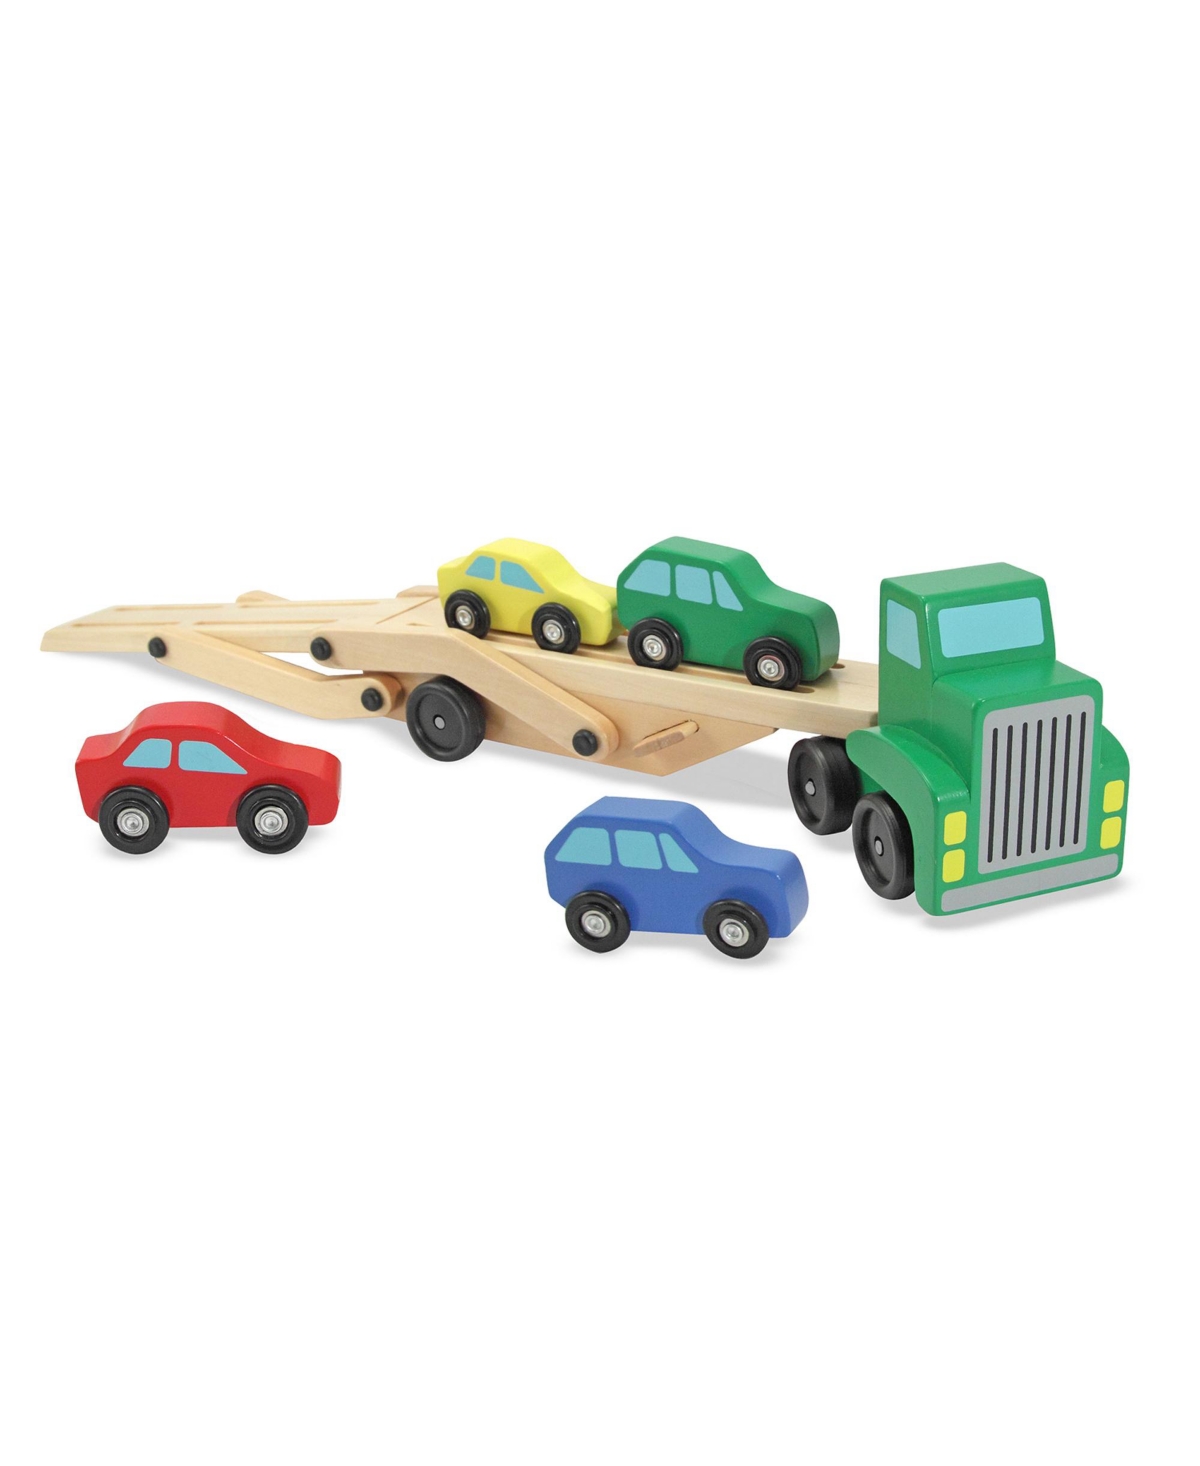 Melissa & Doug Car Carrier Truck And Cars Wooden Toy Set With 1 Truck And 4 Cars In Multi